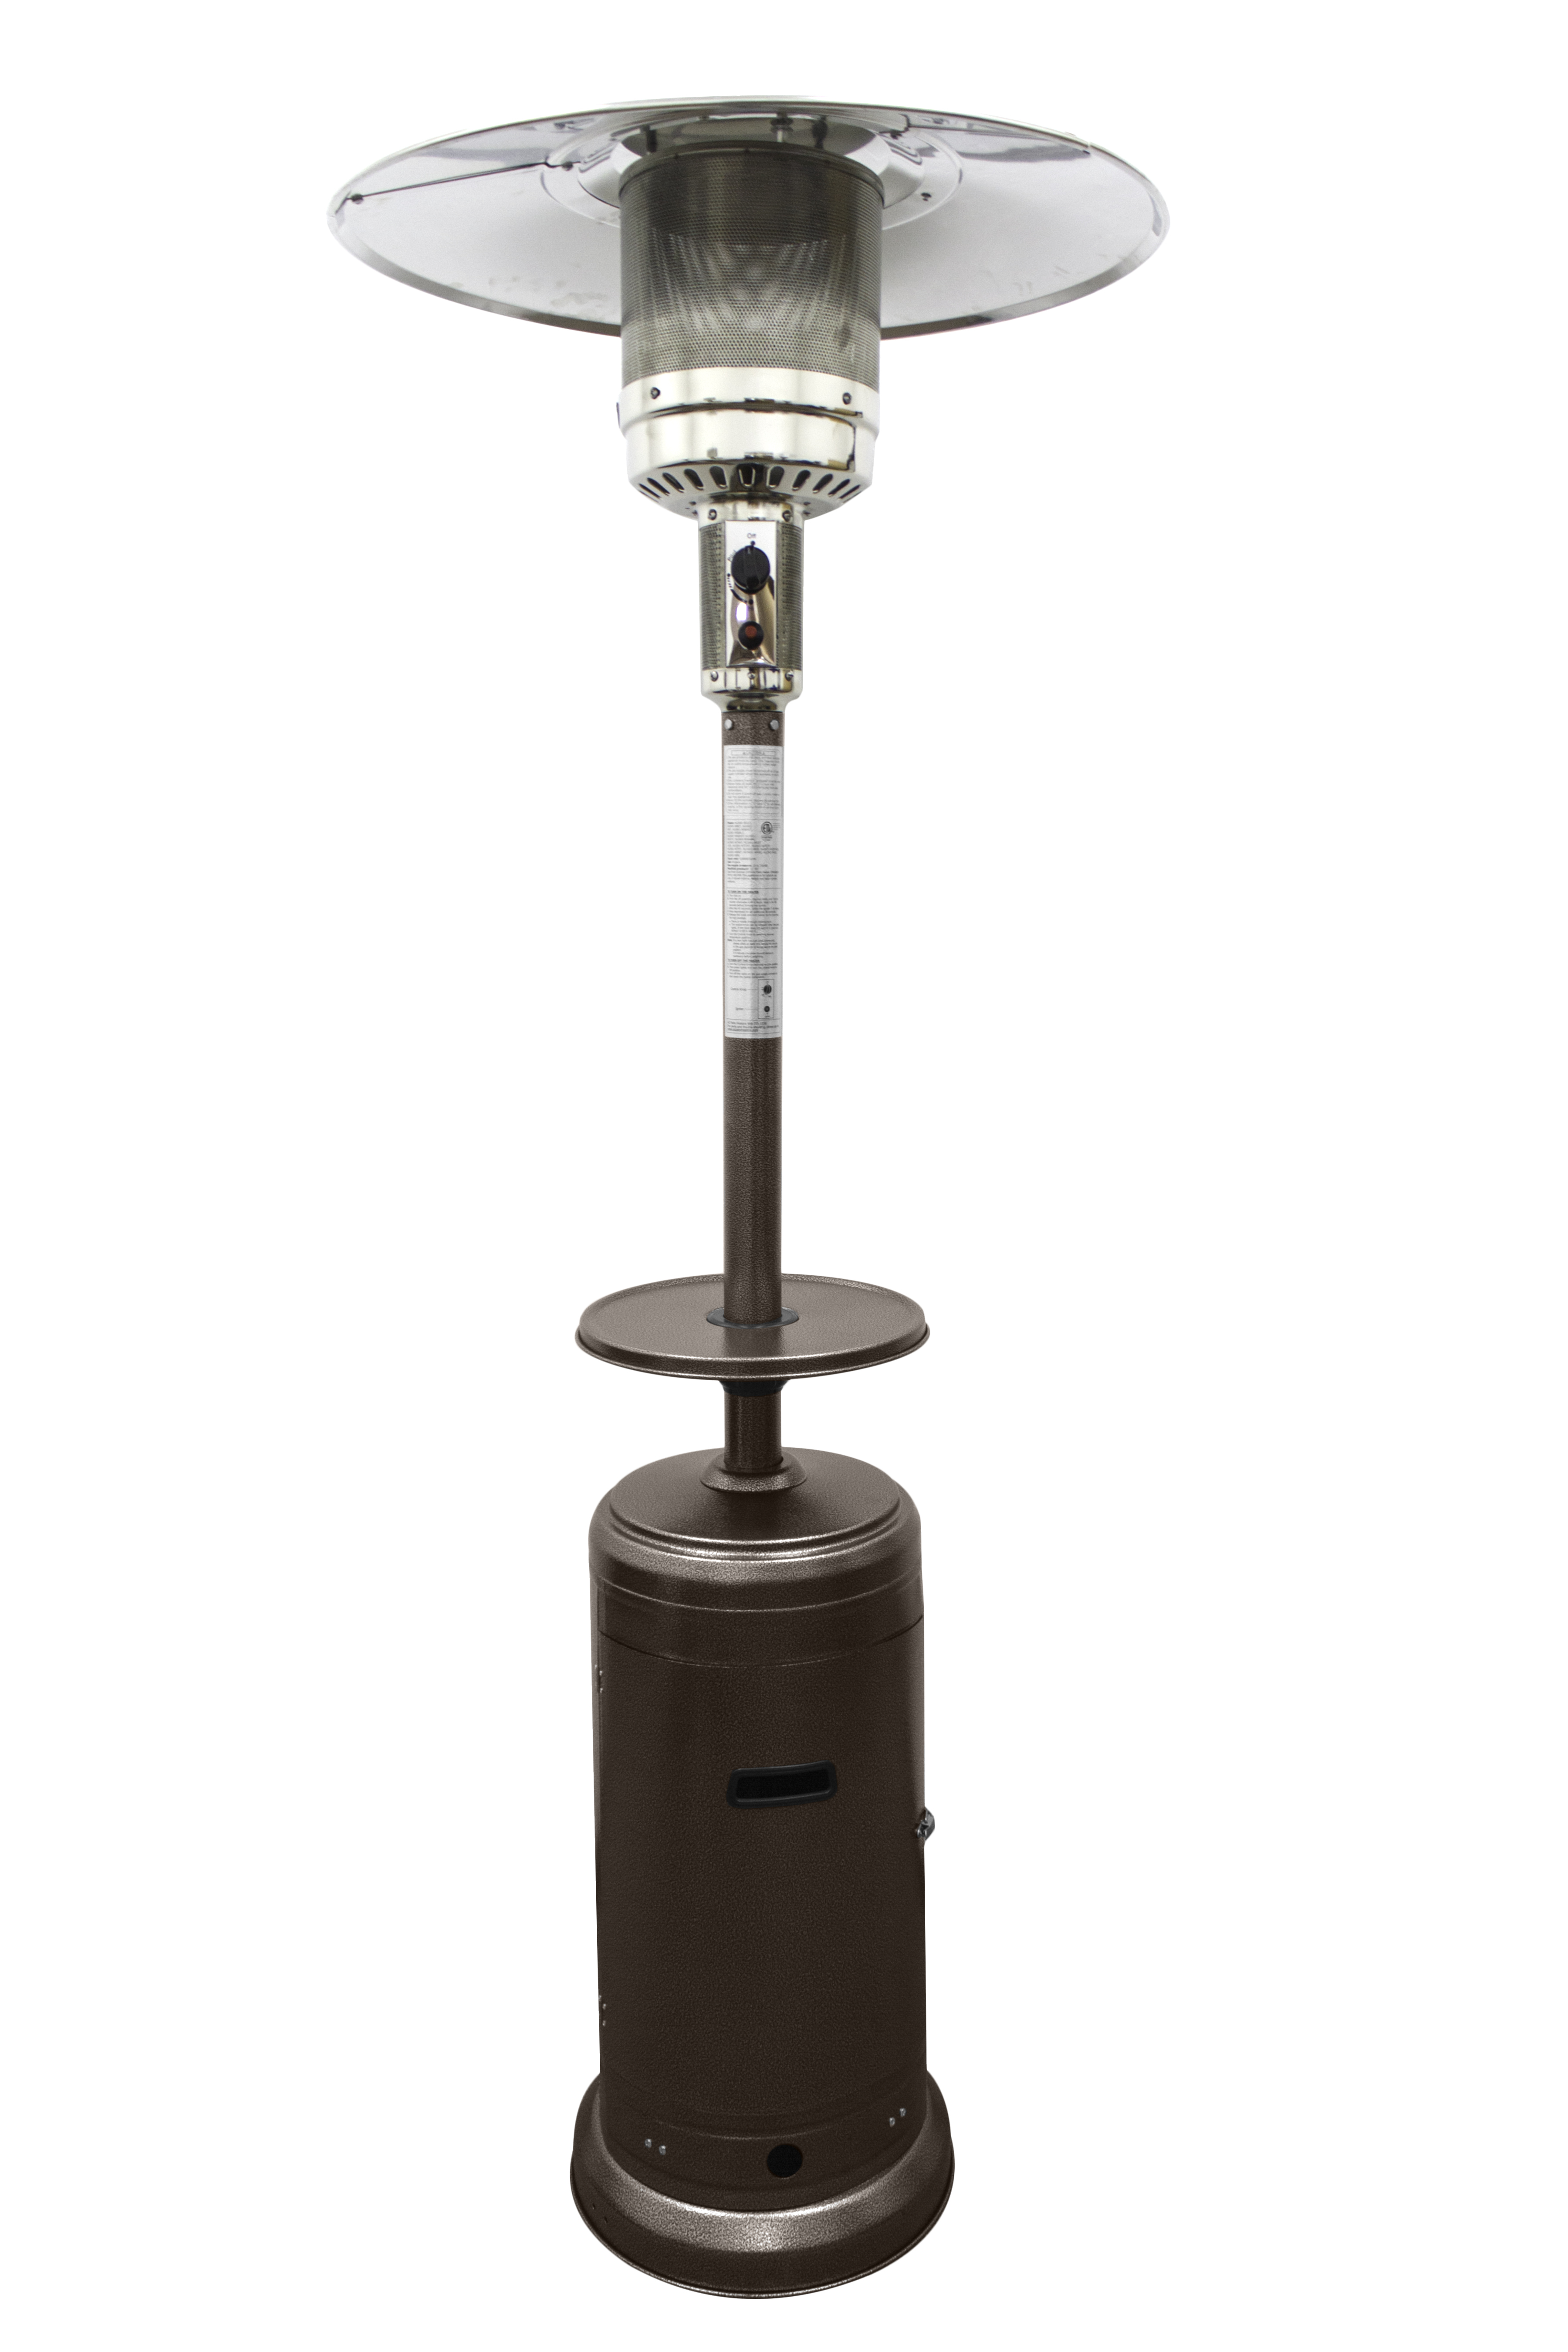 Az Patio Heaters Outdoor Patio Heater In Hammered Bronze Walmart within sizing 3600 X 5400